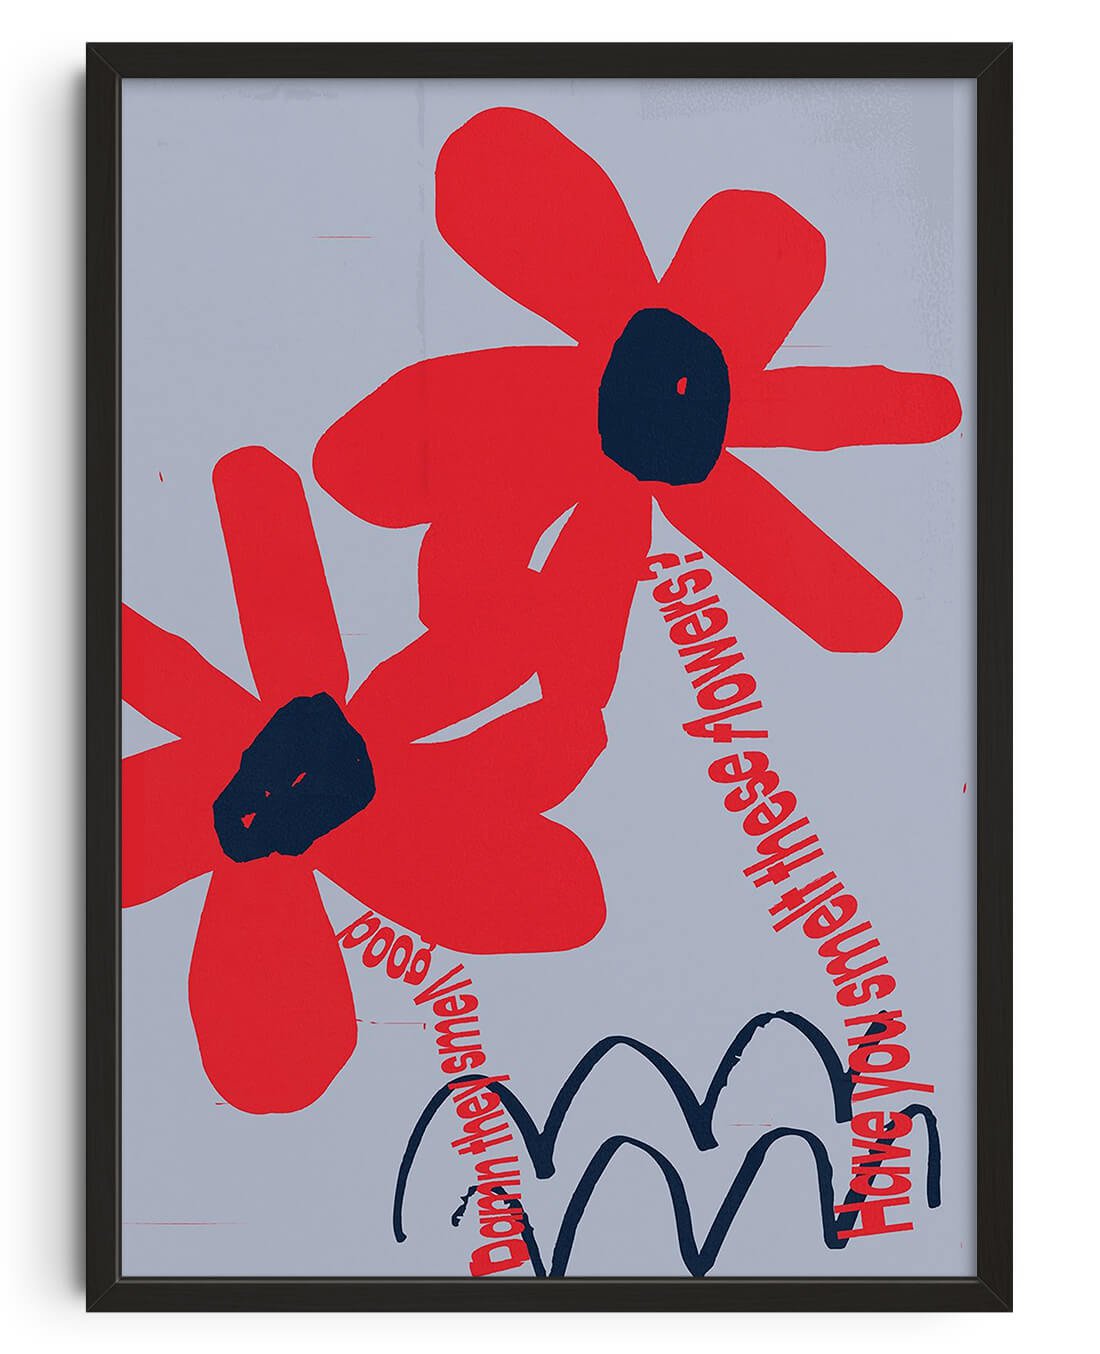 11.7x16.5" (A3) Have you smelt these flowers? - UNFRAMED contemporary wall art print by Lou Wang - sold by DROOL